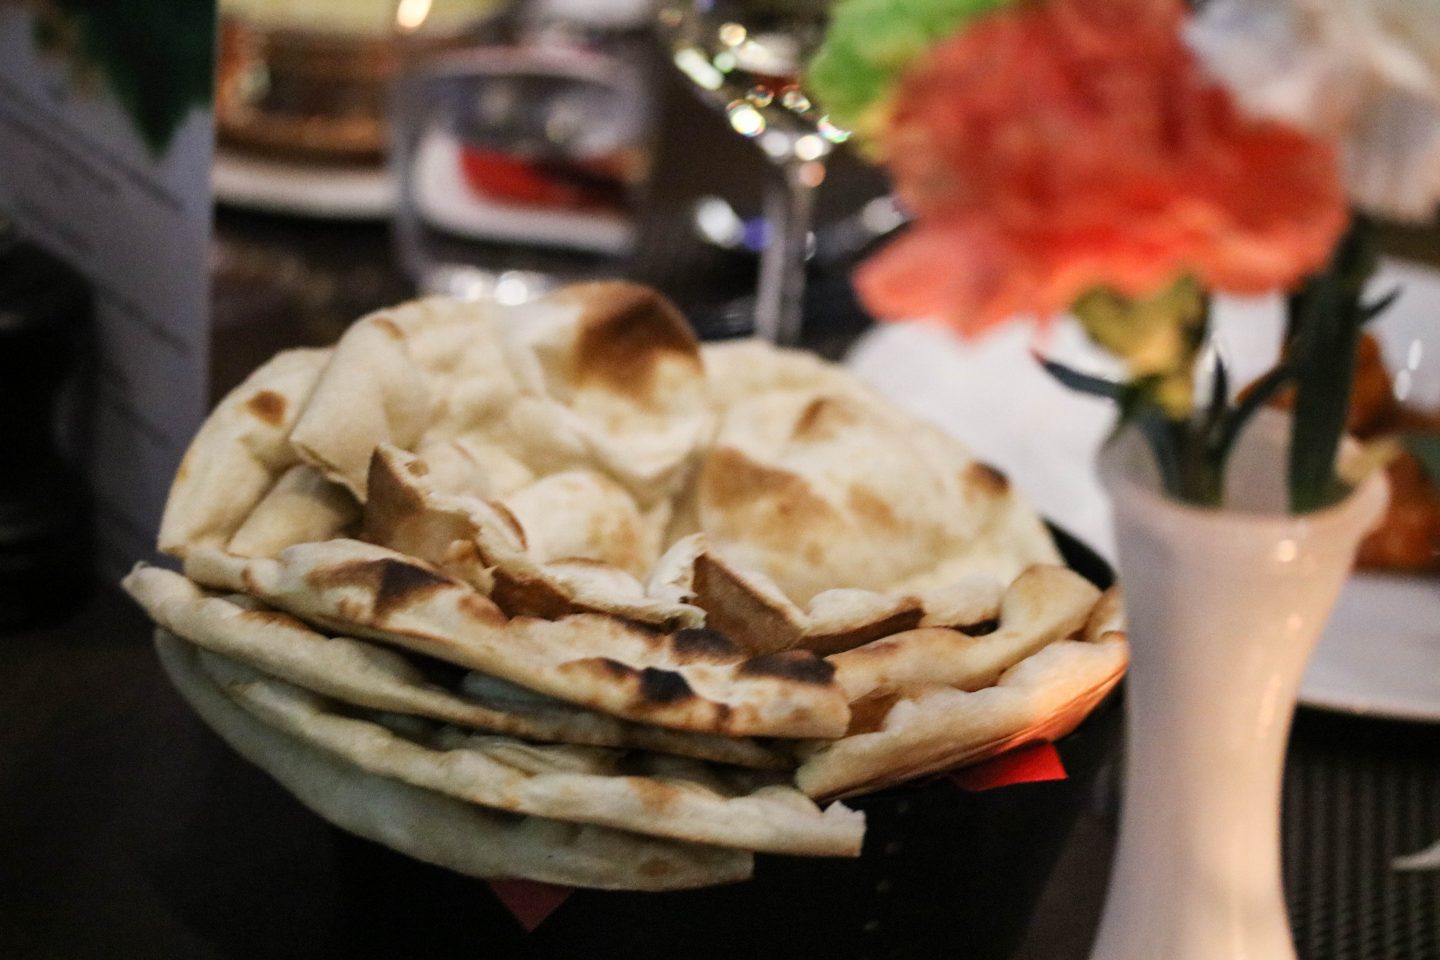 The LaLiT Hotel London - Baluchi - Naan - Lifestyle Enthusiast Blog Review